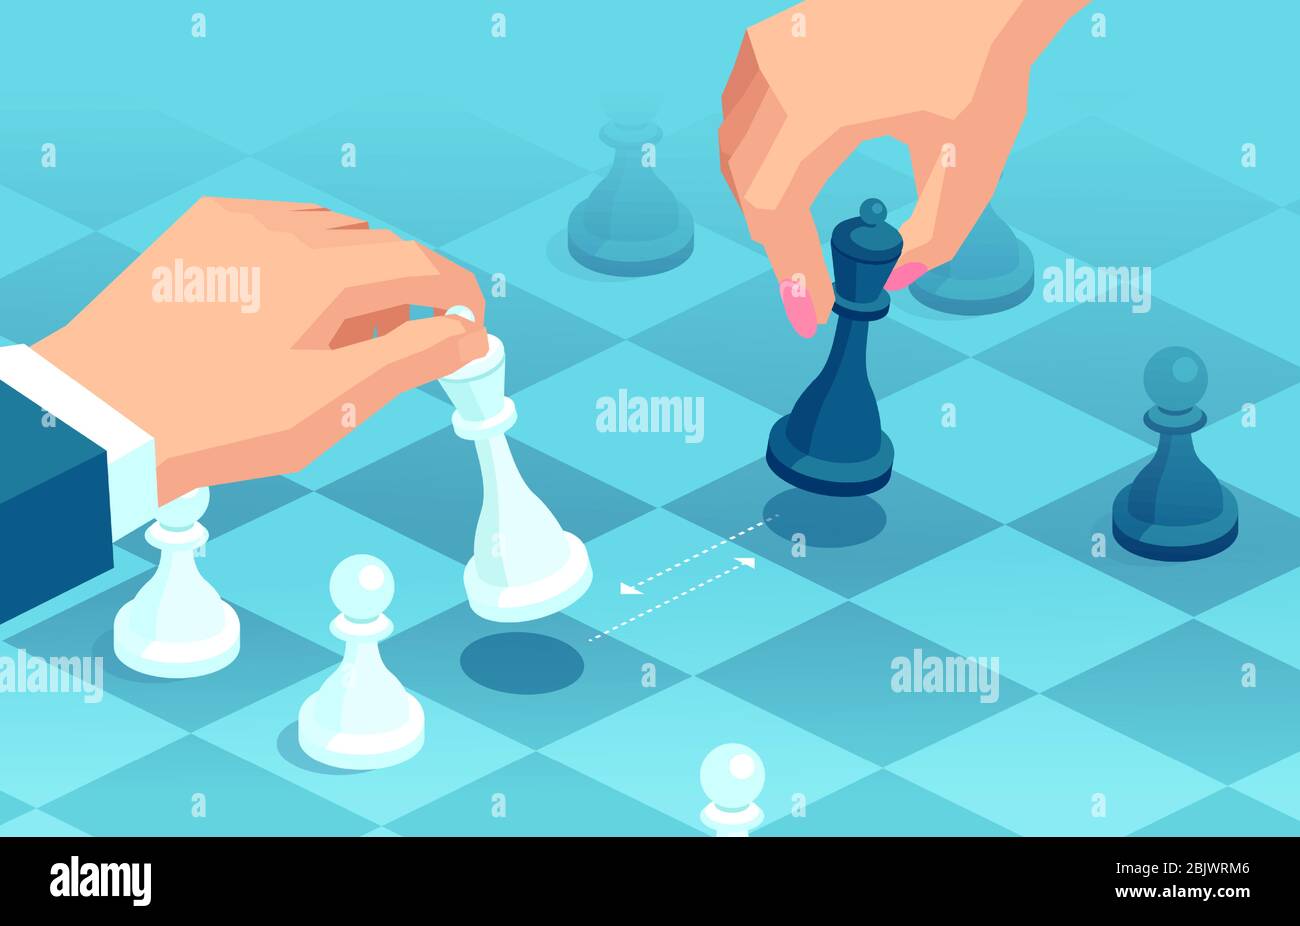 Vector of a man and woman making strategic moves in chess game Stock Vector